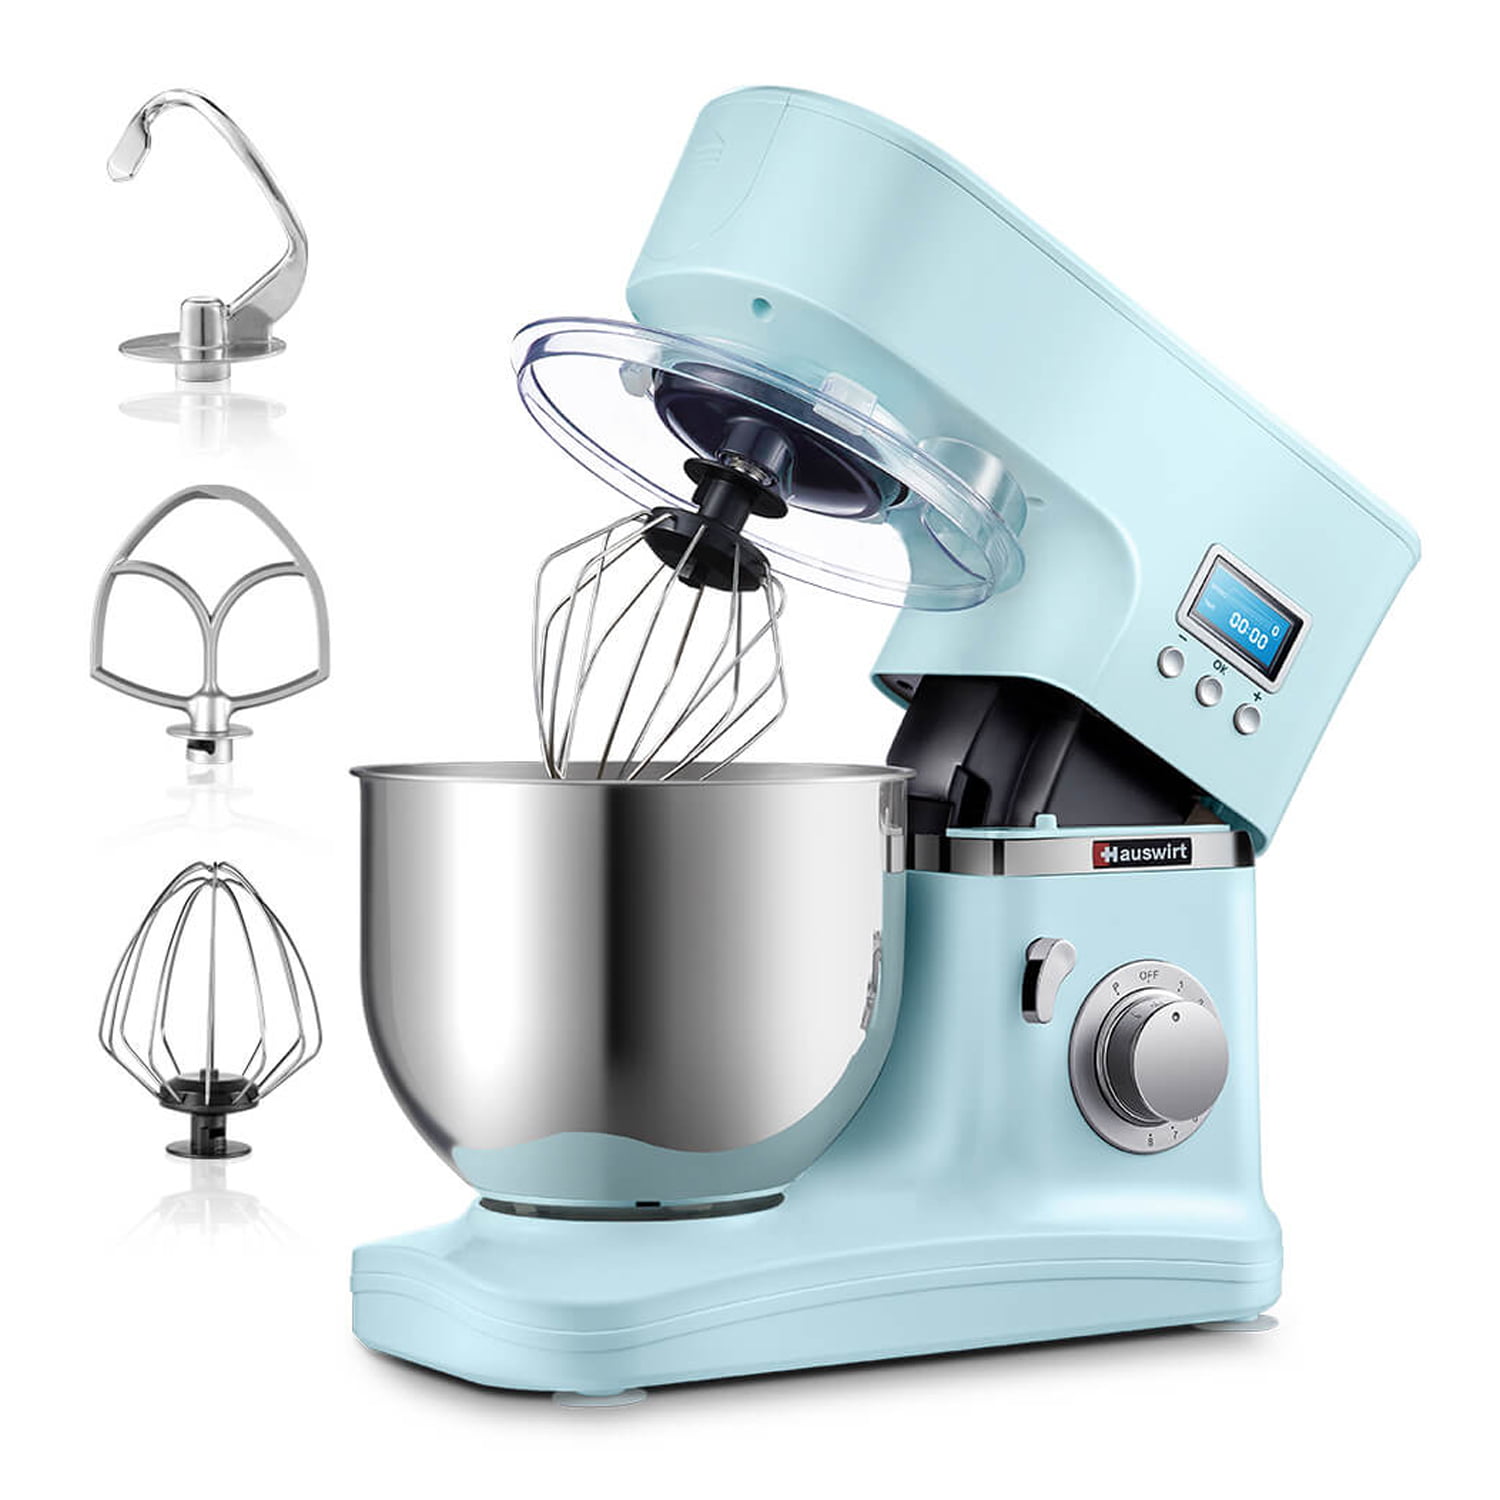 Samsaimo Stand Mixer,6.5-QT 660W 10-Speed Tilt-Head Food Mixer, Kitchen  Electric Mixer with Bowl, Dough Hook, Beater, Whisk for Most Home Cooks,  (6.5QT, Almond Cream? 